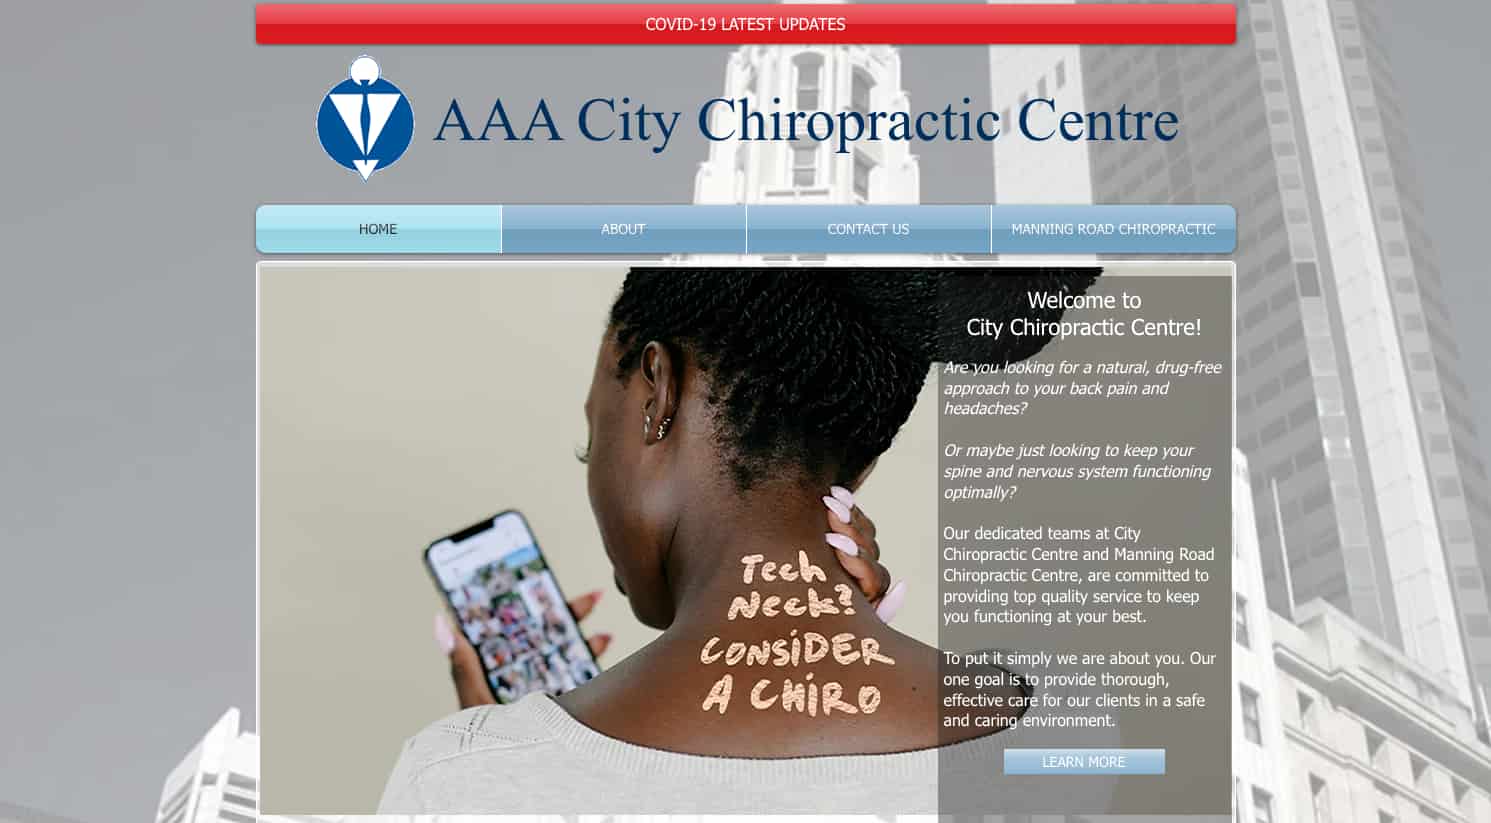 AAA City Chiropractic Centre